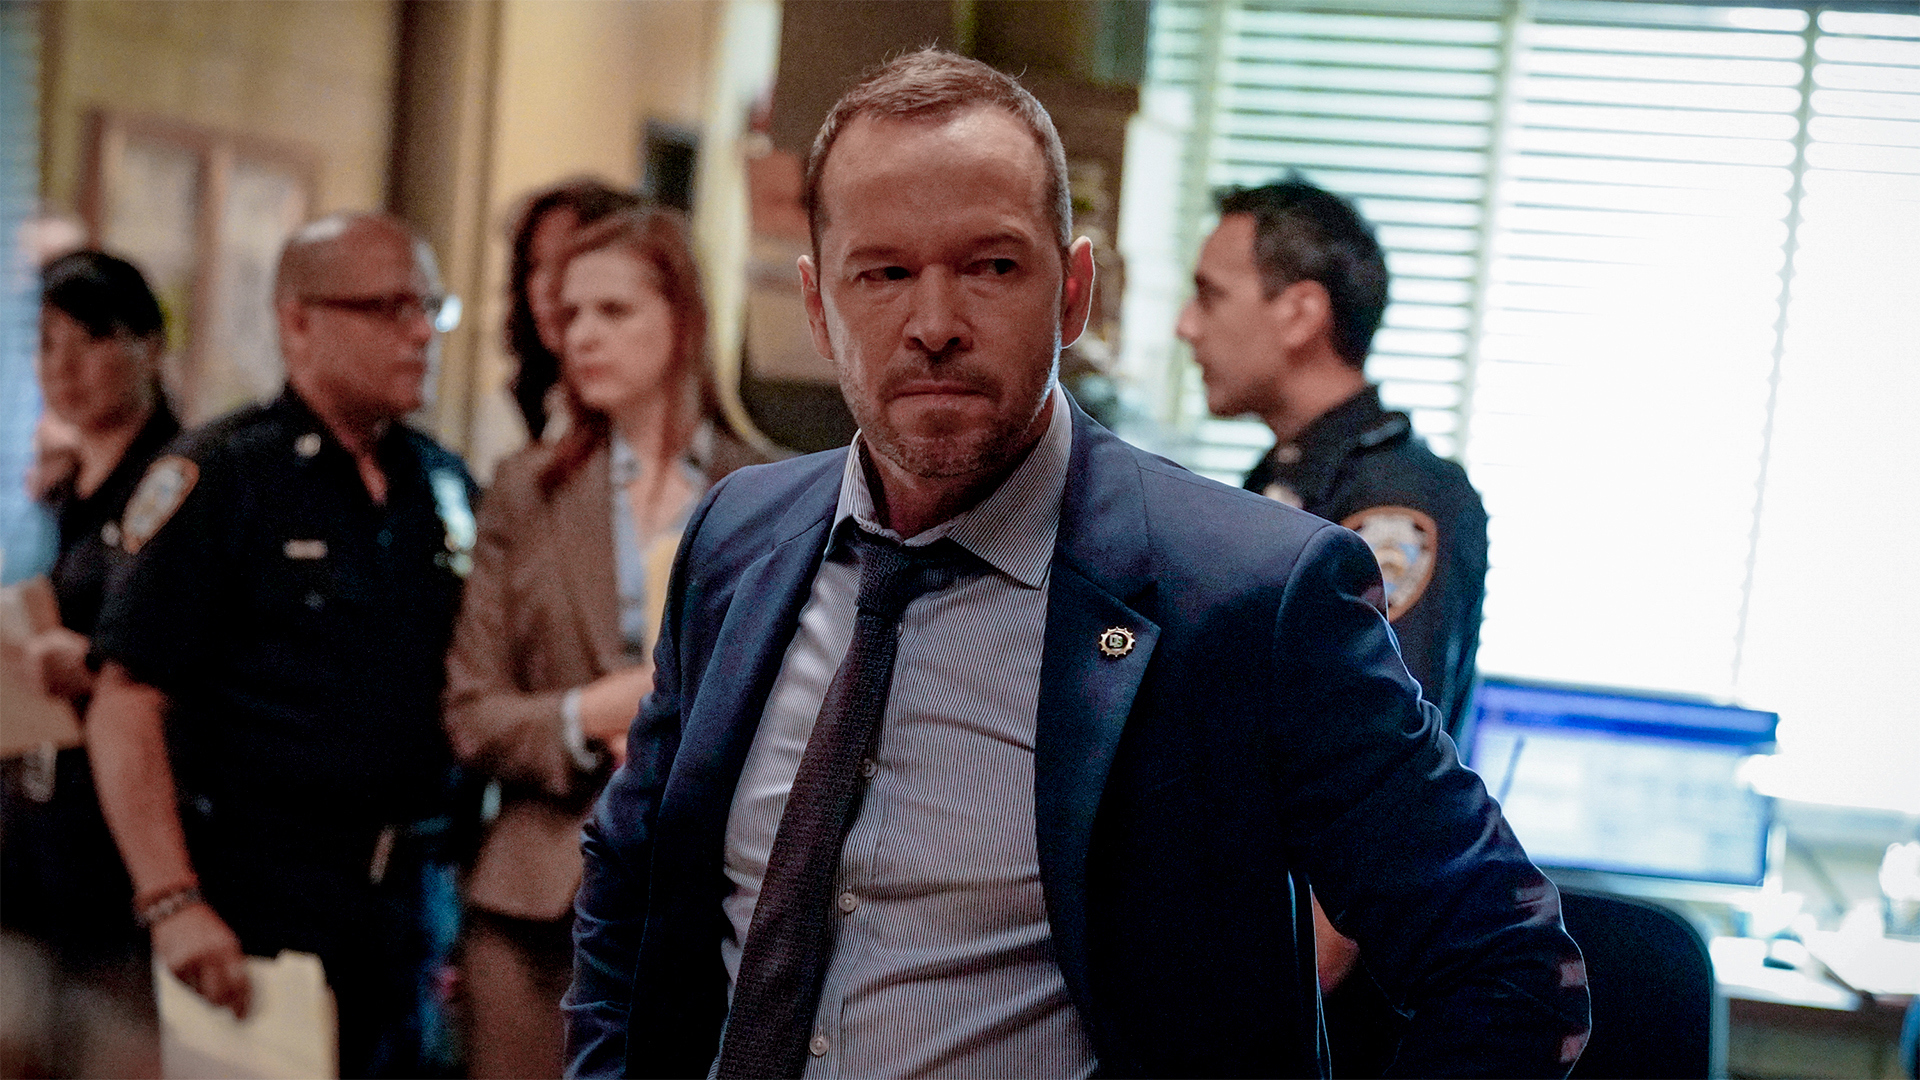 Watch Blue Bloods Season 9 Episode 1 Playing with Fire Full show on CBS